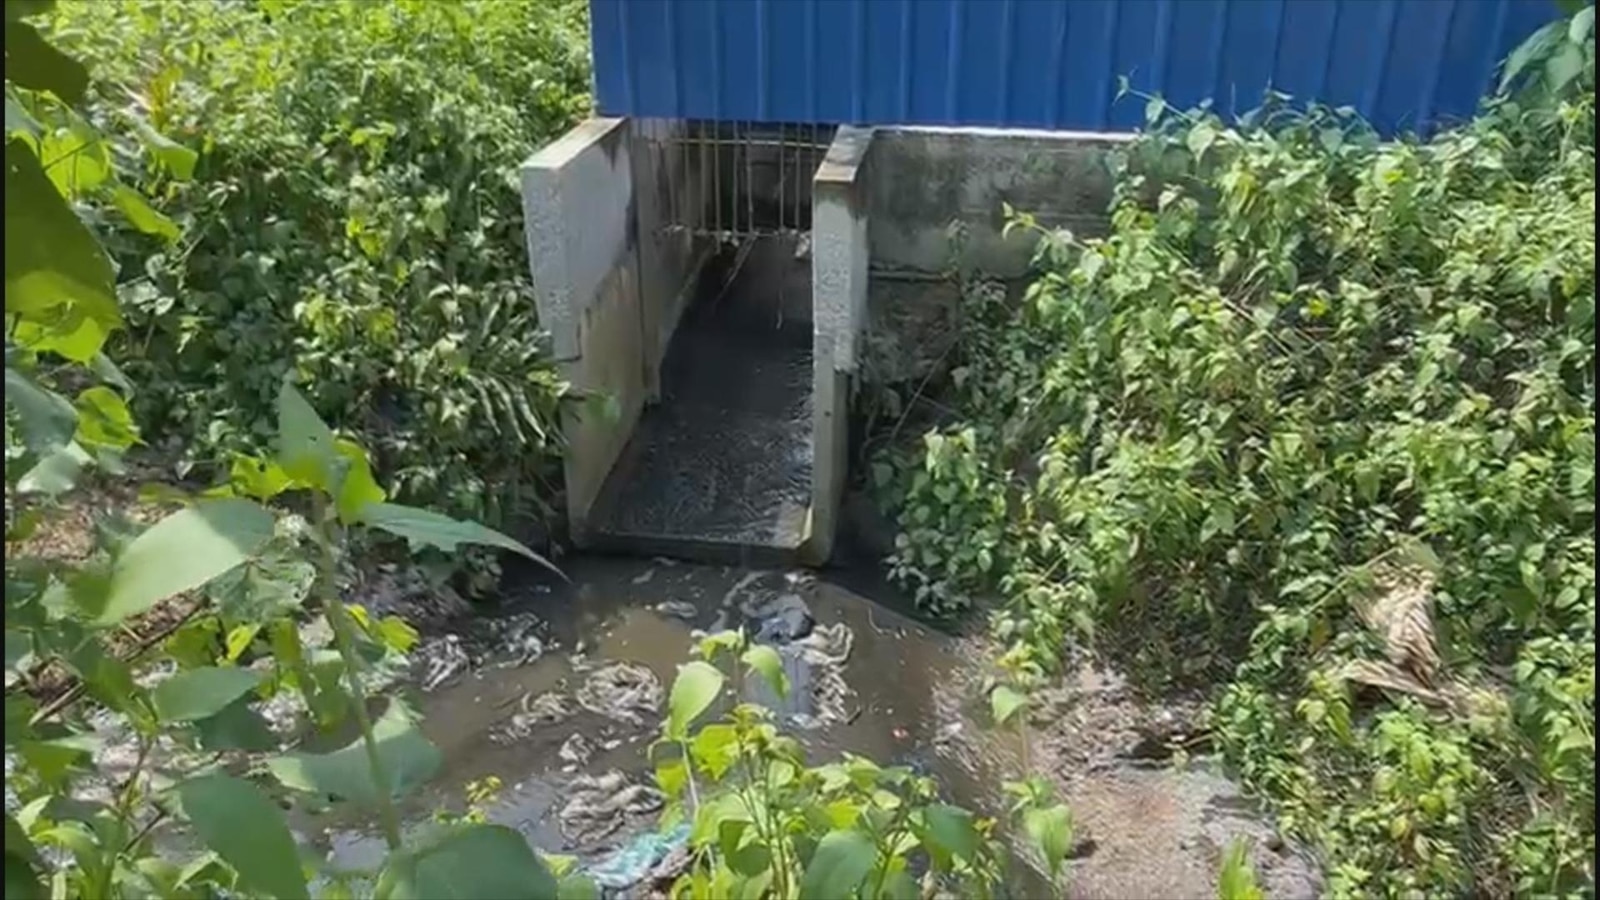 Facility seen polluting Malaysian river part of anti-pollution program promoted by US plastics industry [Video]